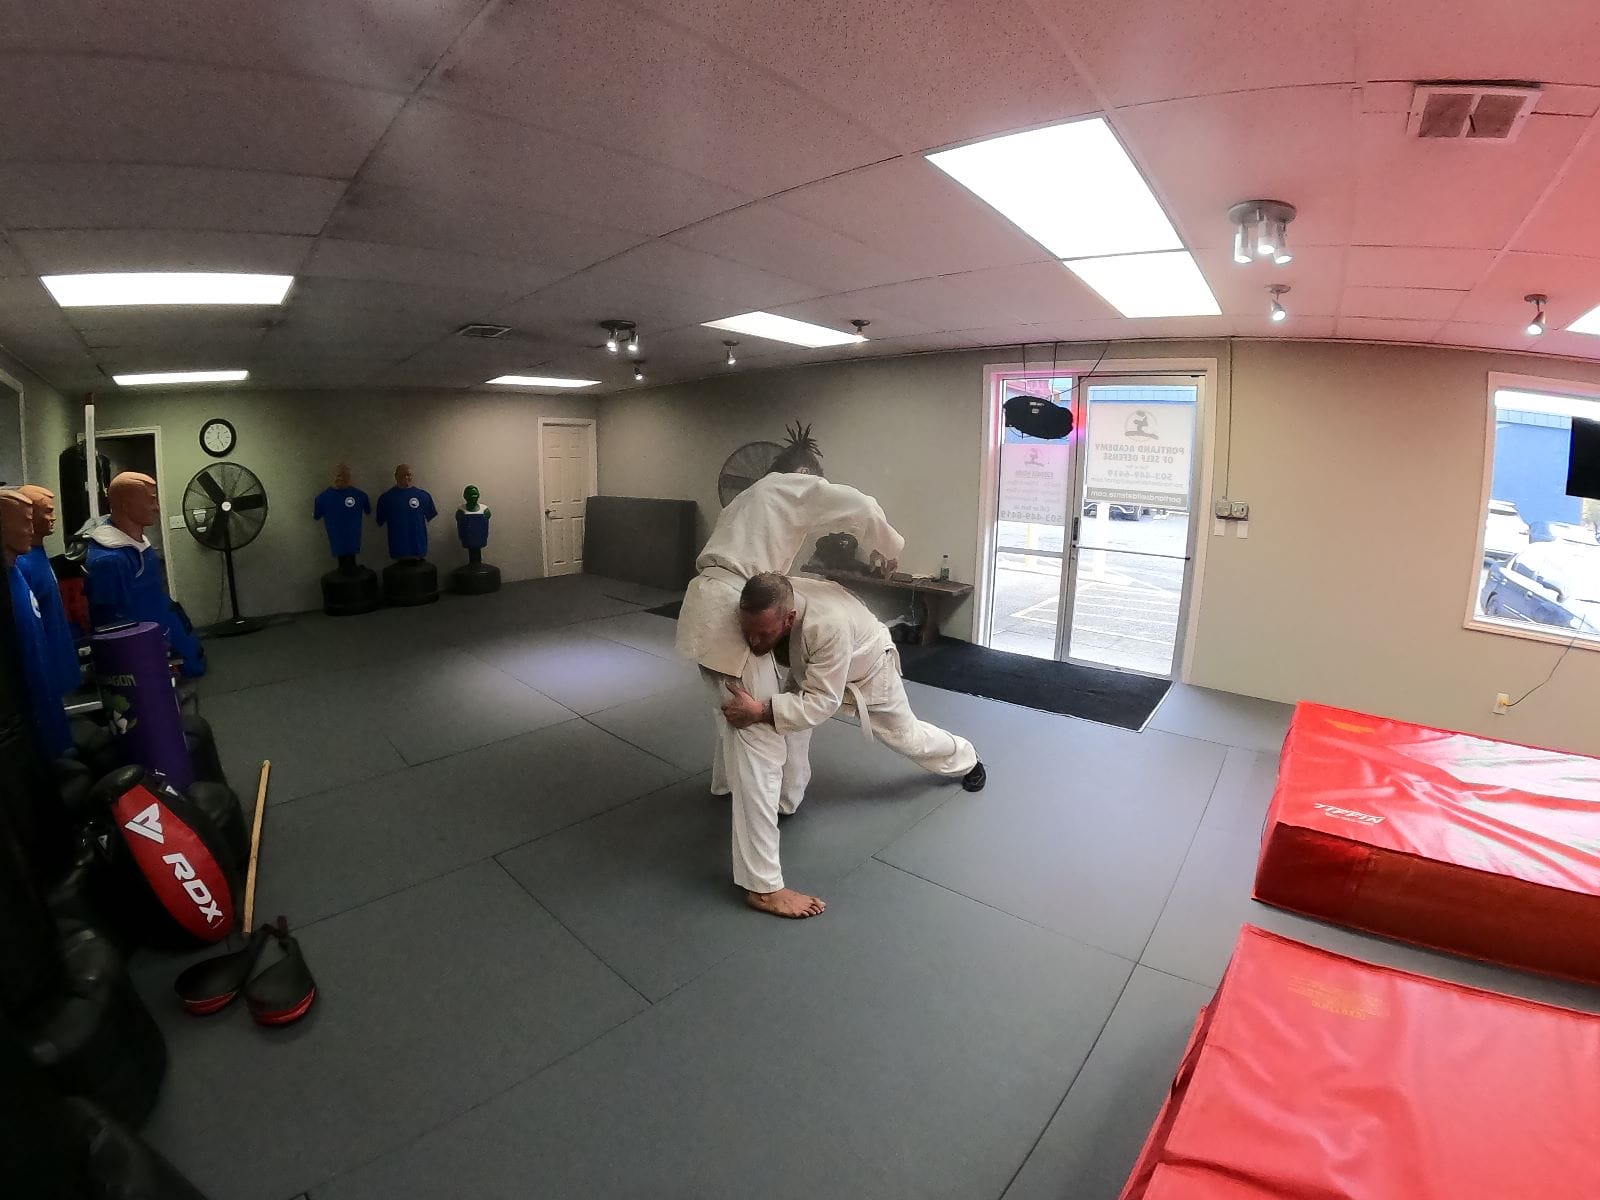 OUR ADULT HAPKIDO SELFâ€‘DEFENSE CLASSES ARE FUN, FUNCTIONAL AND INTENSIVE!